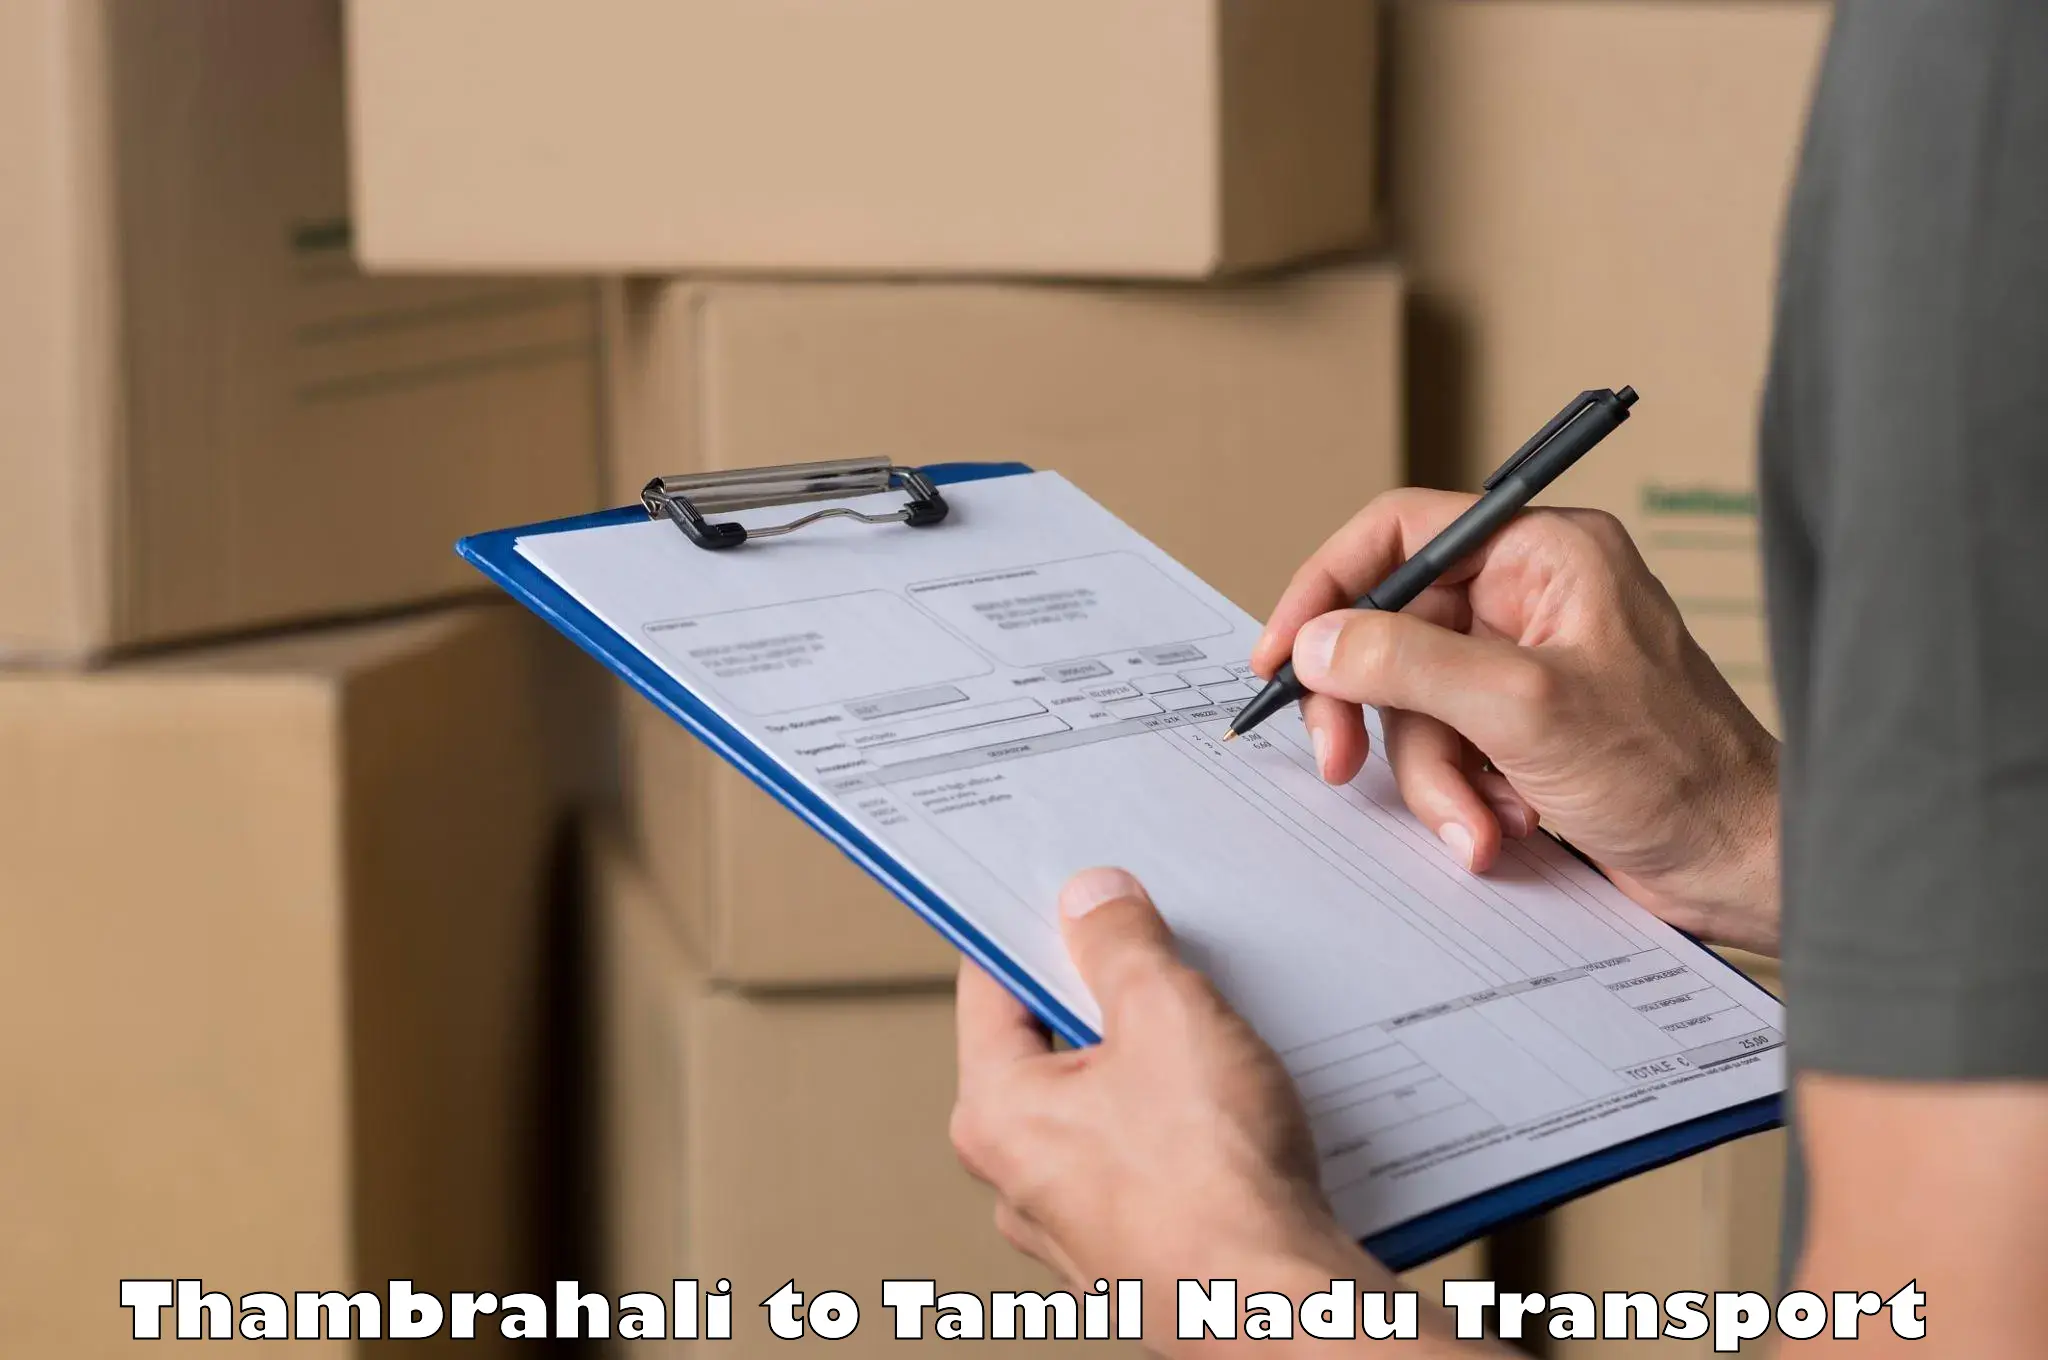 Transport bike from one state to another Thambrahali to Tamil Nadu